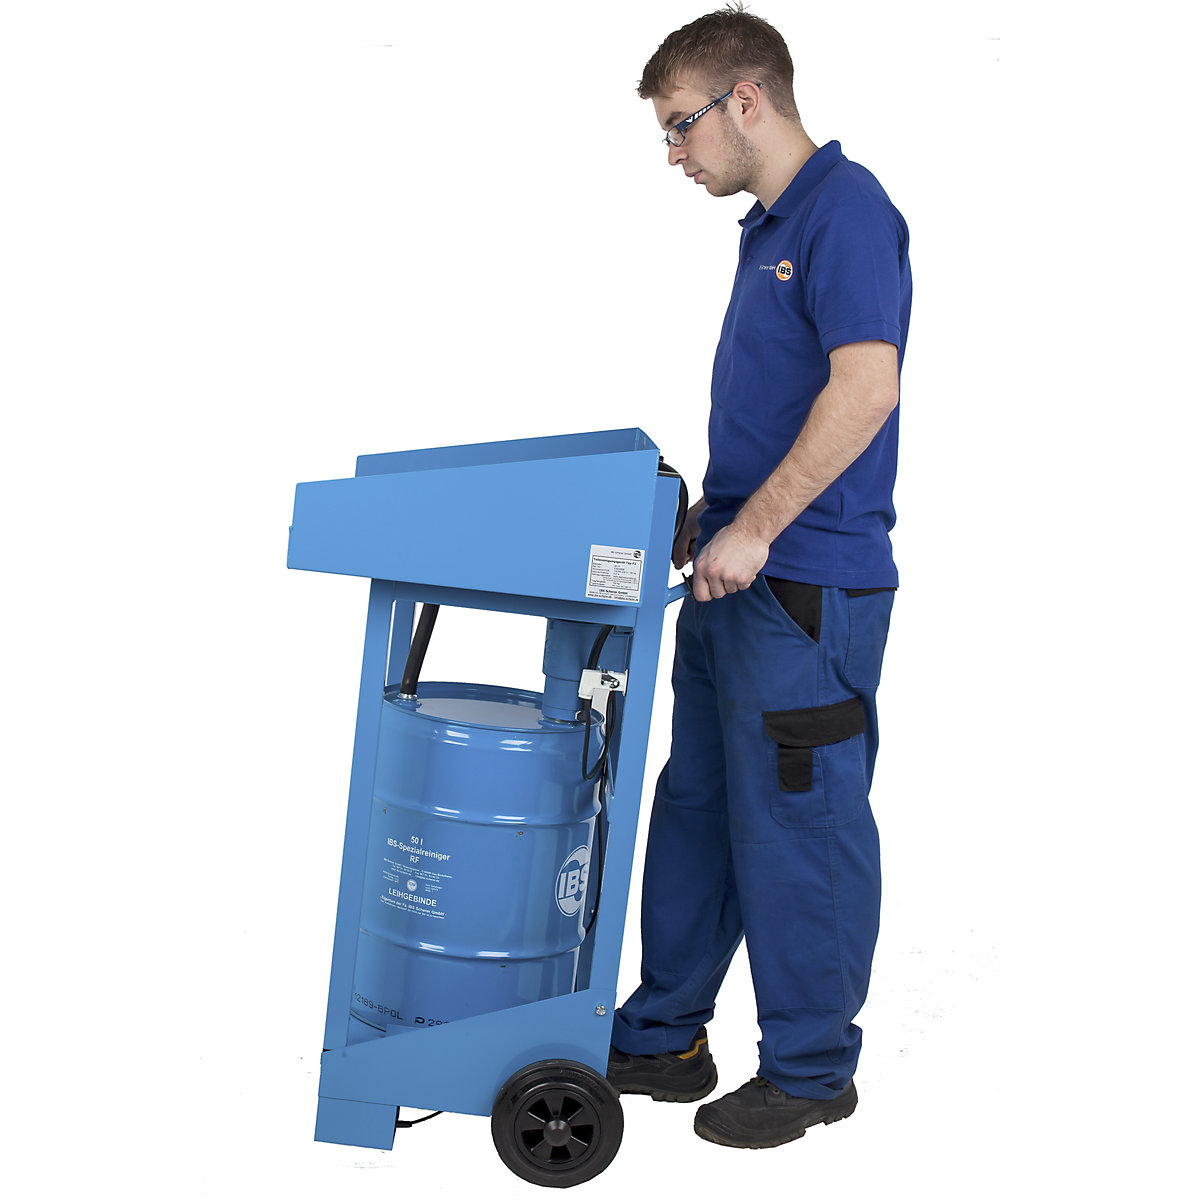 Professional parts cleaner – IBS Scherer: complete set with 200 l